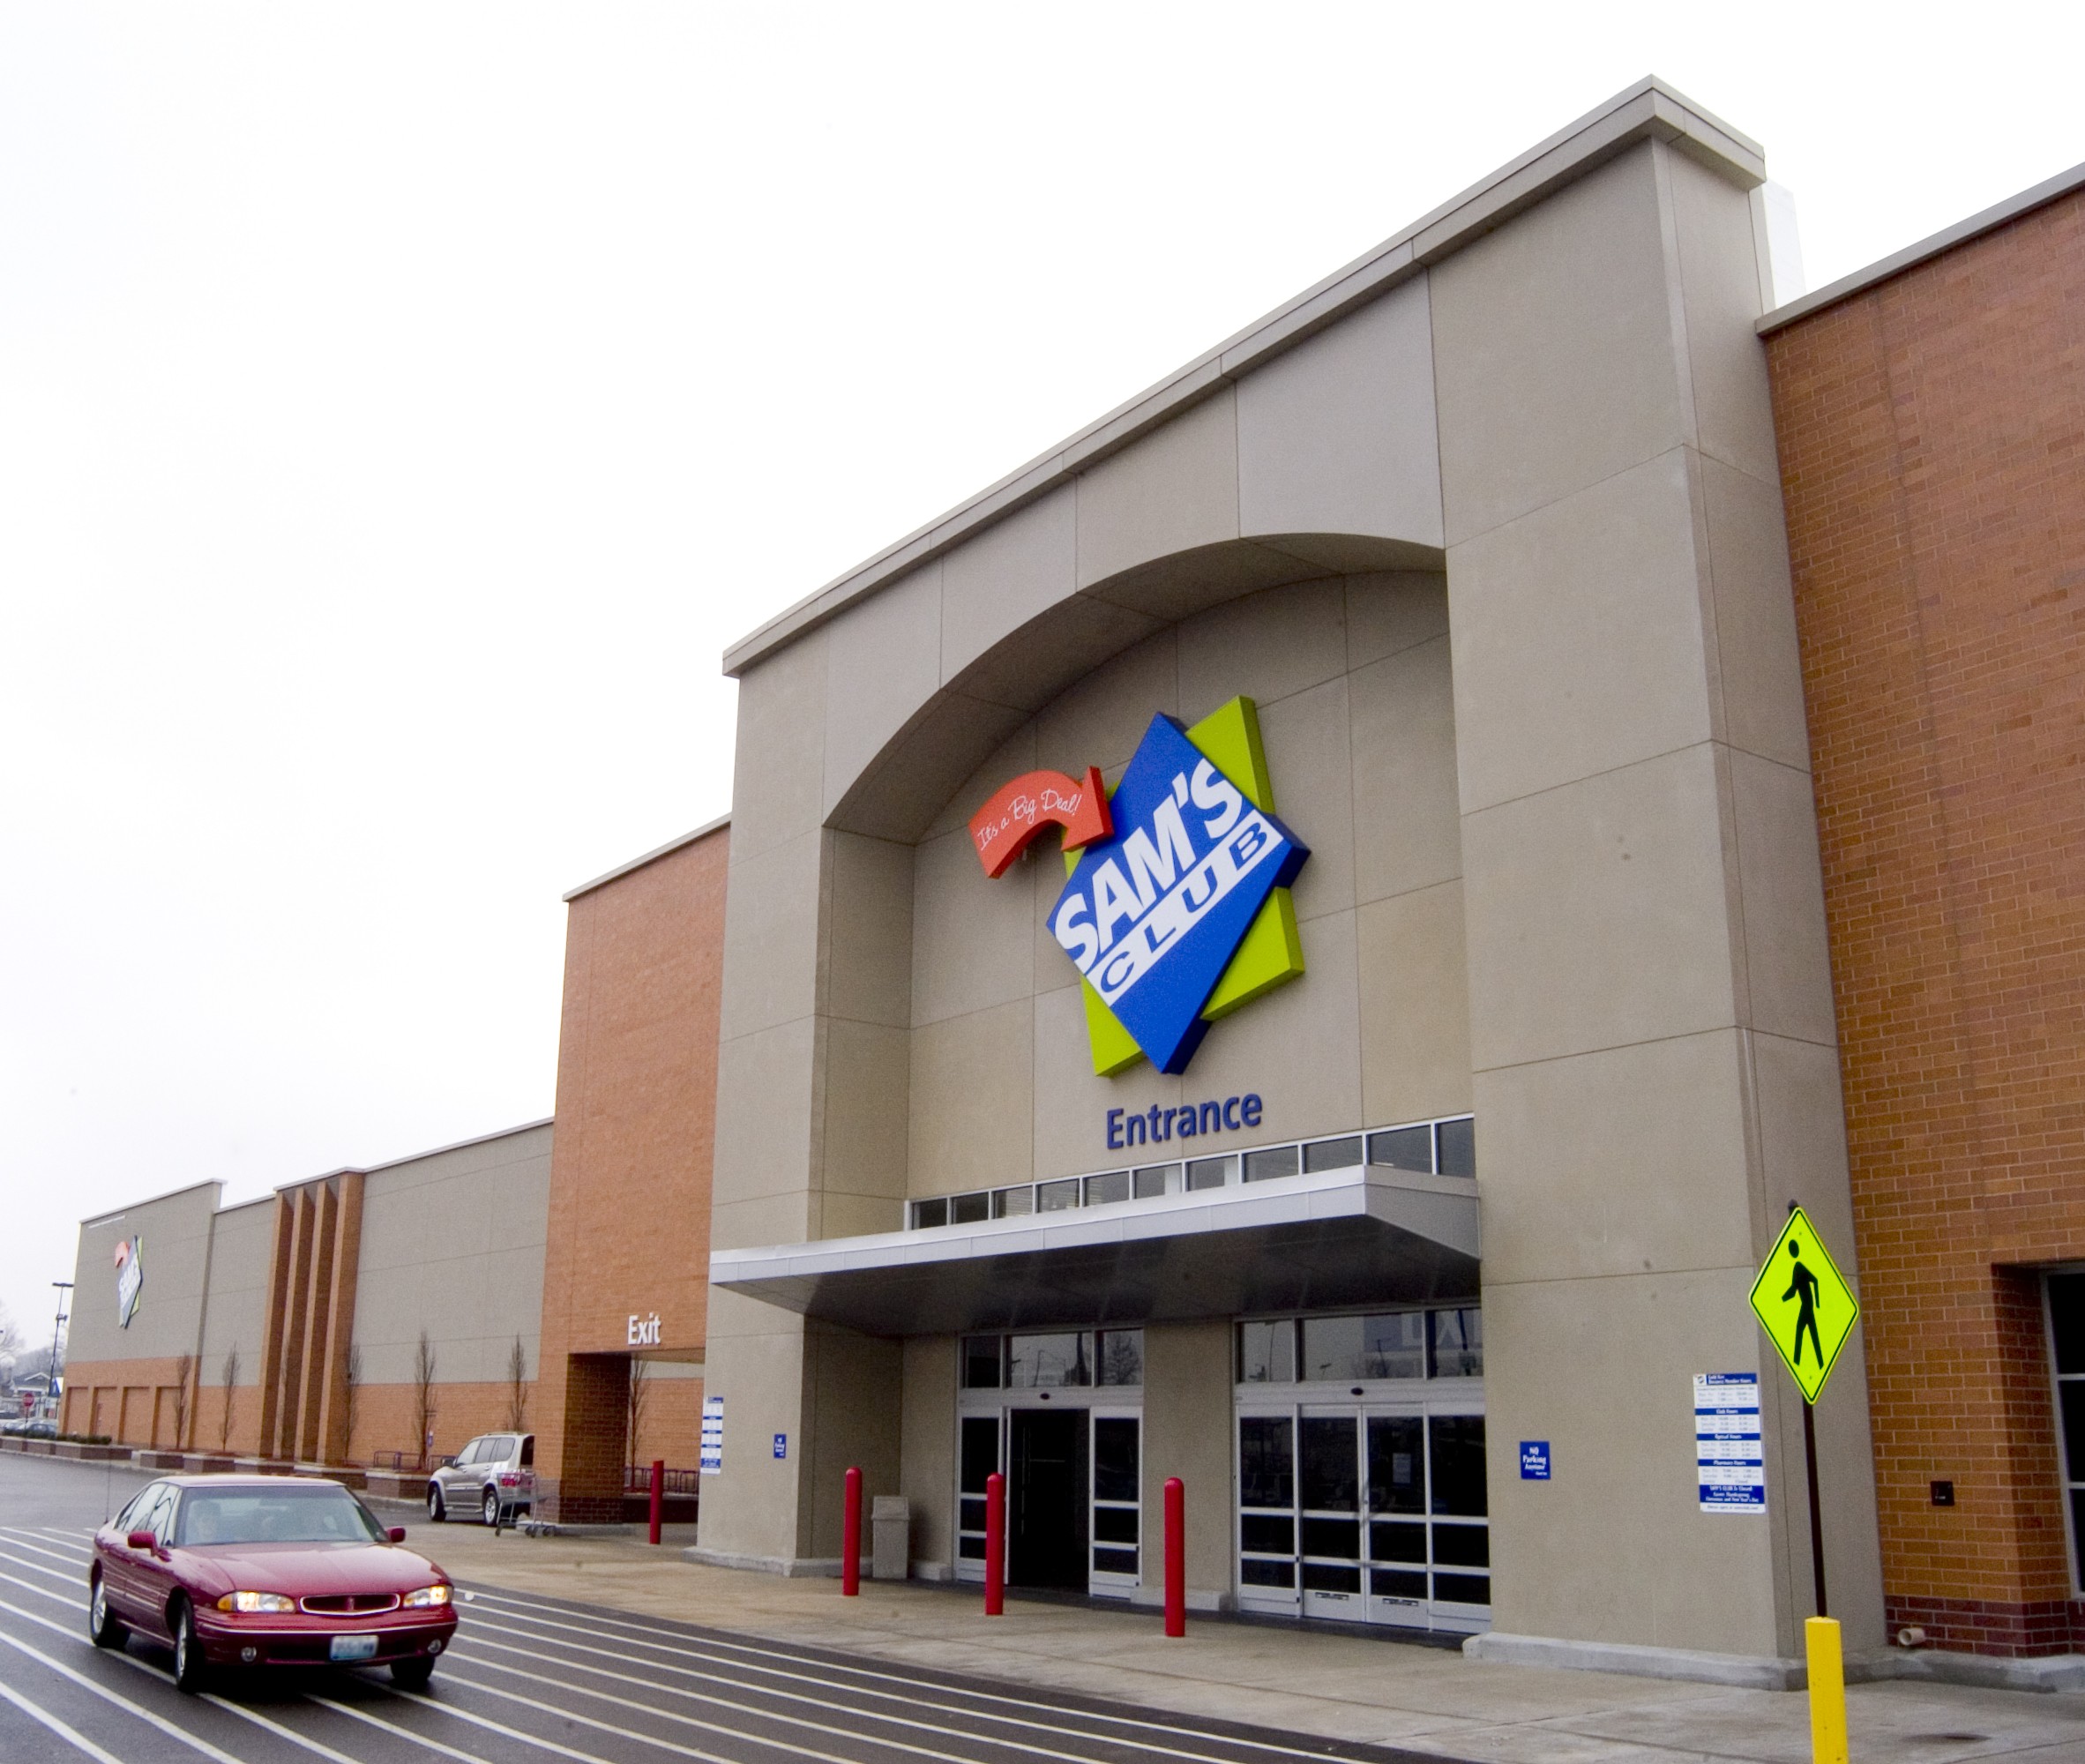 See which four Sam’s Club locations are closing in Arizona Rose Law